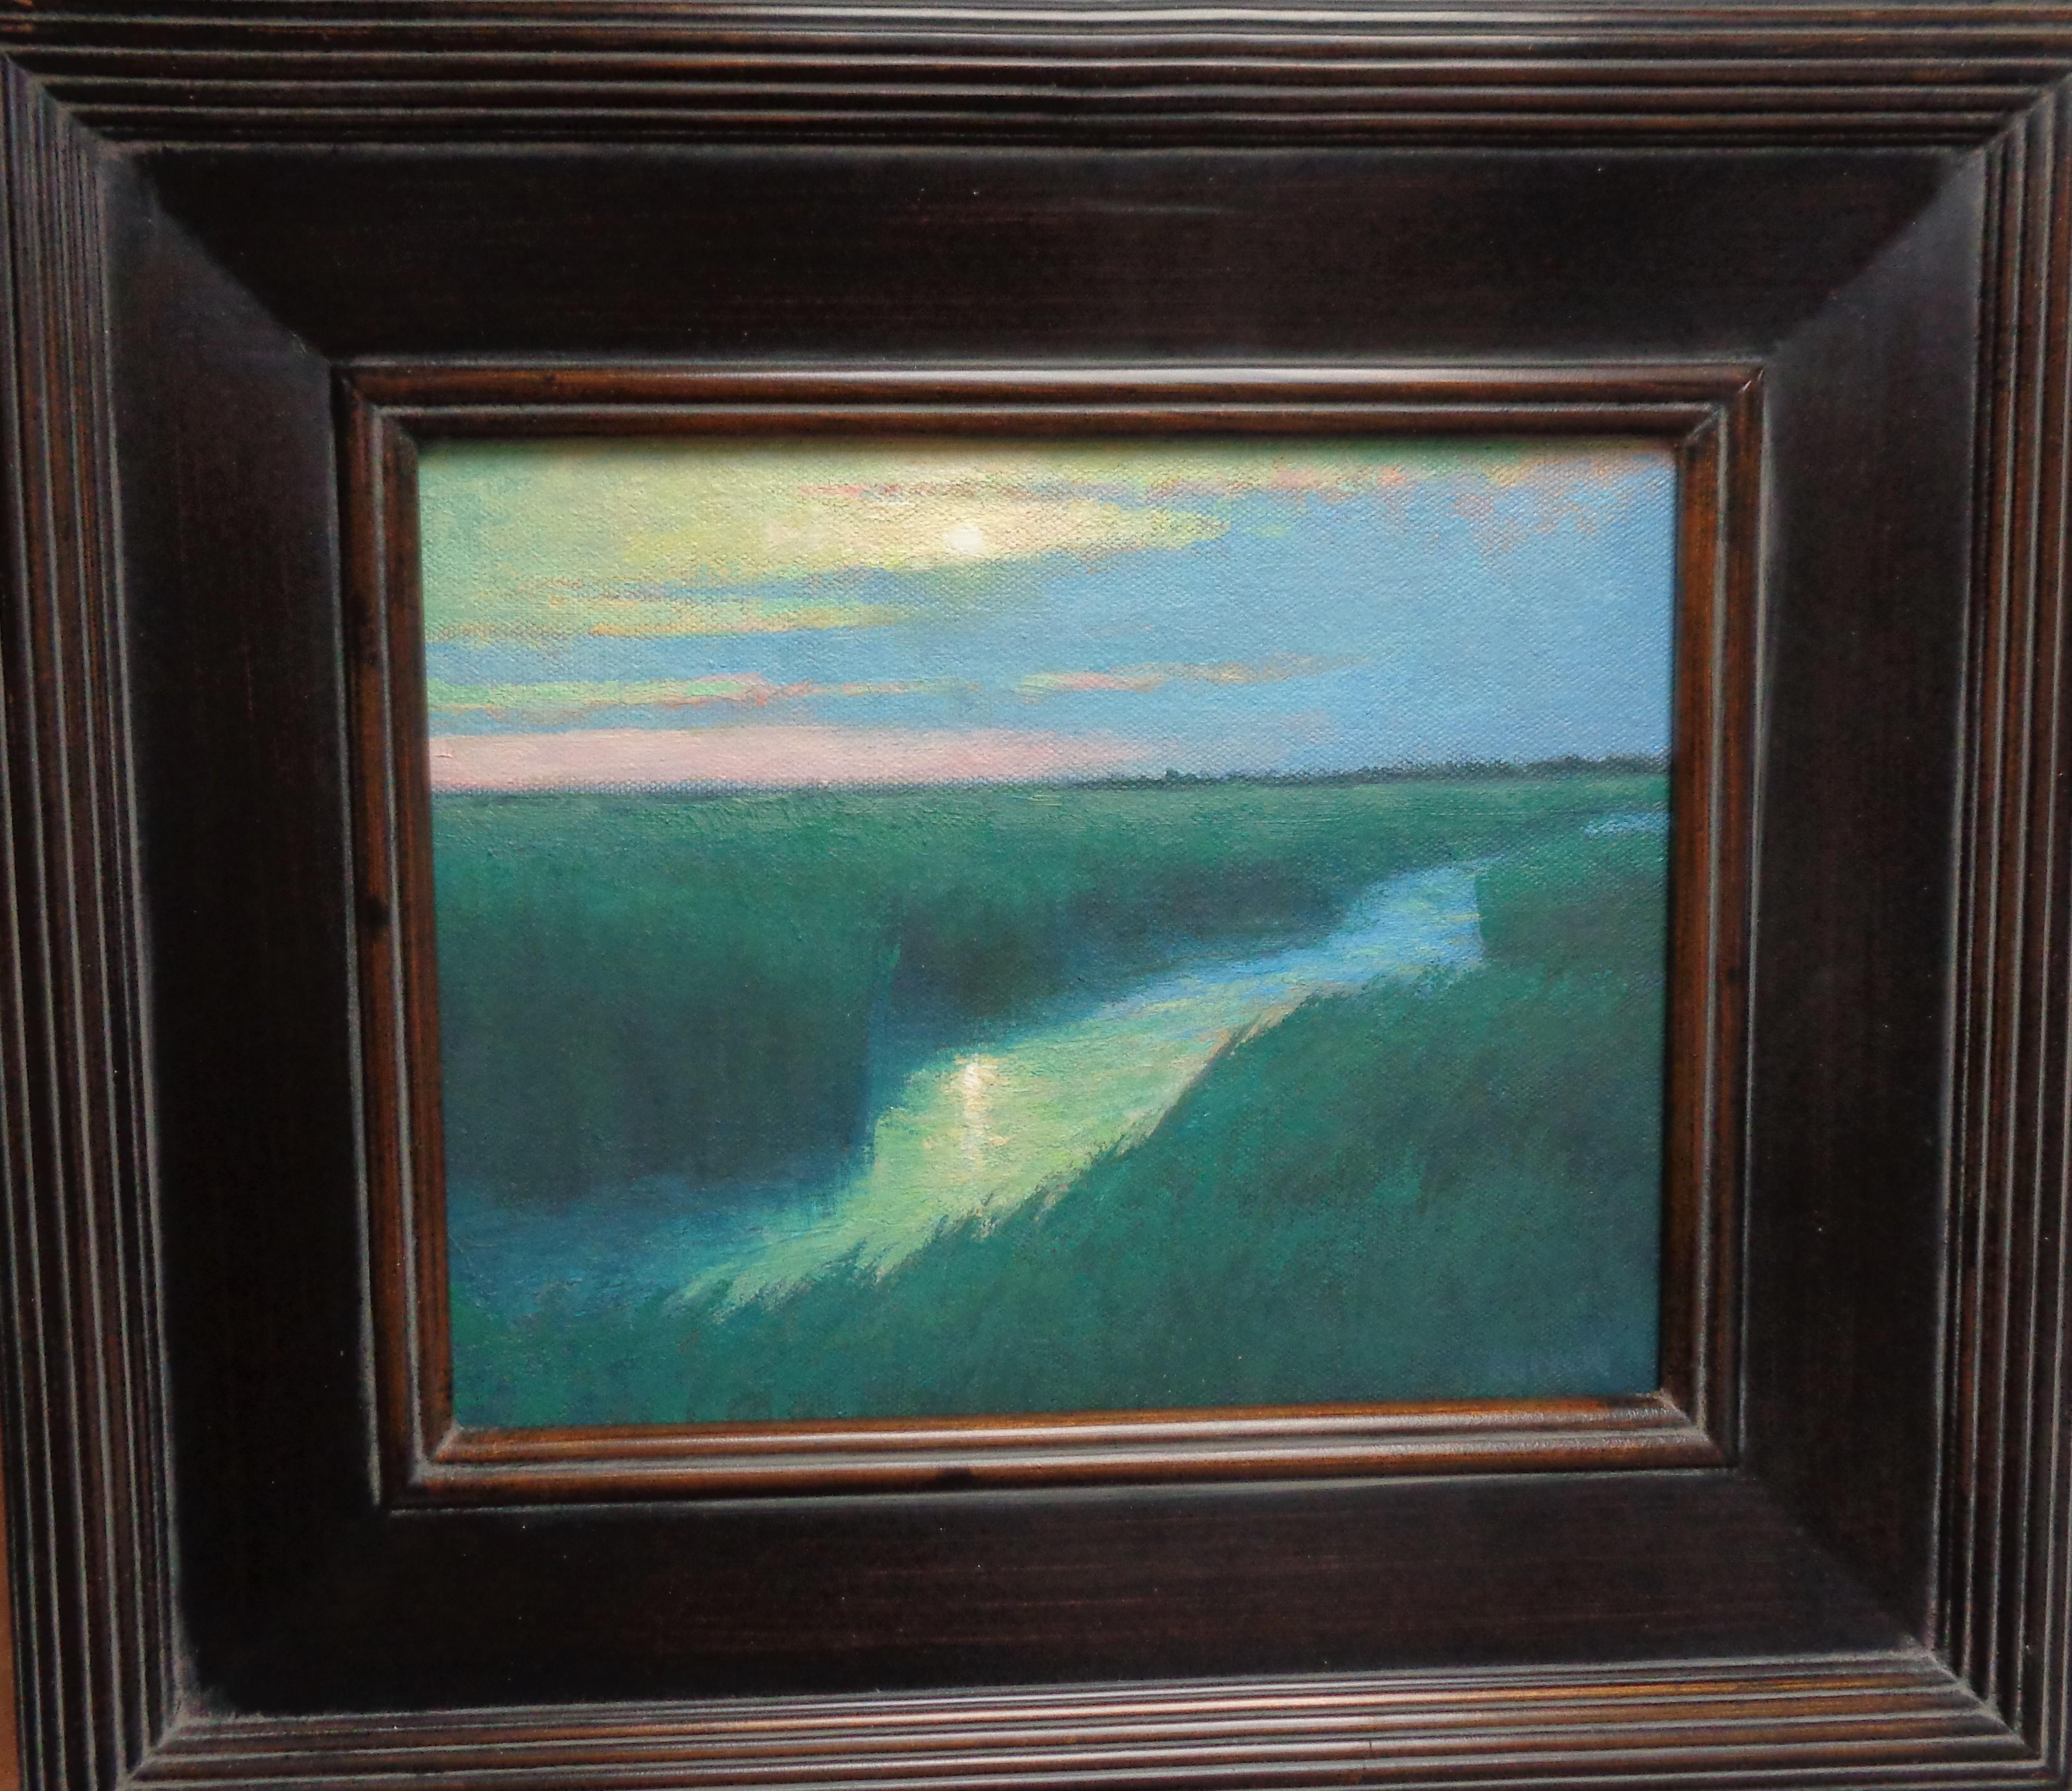 Moonlight Marsh
oil/panel
8 x 10 unframed 13.75 x 15.5 framed, is an oil painting on canvas panel by award winning contemporary artist Michael Budden that showcases a beautiful view of the rising moon over top a gorgeous green marsh. 
ARTIST'S